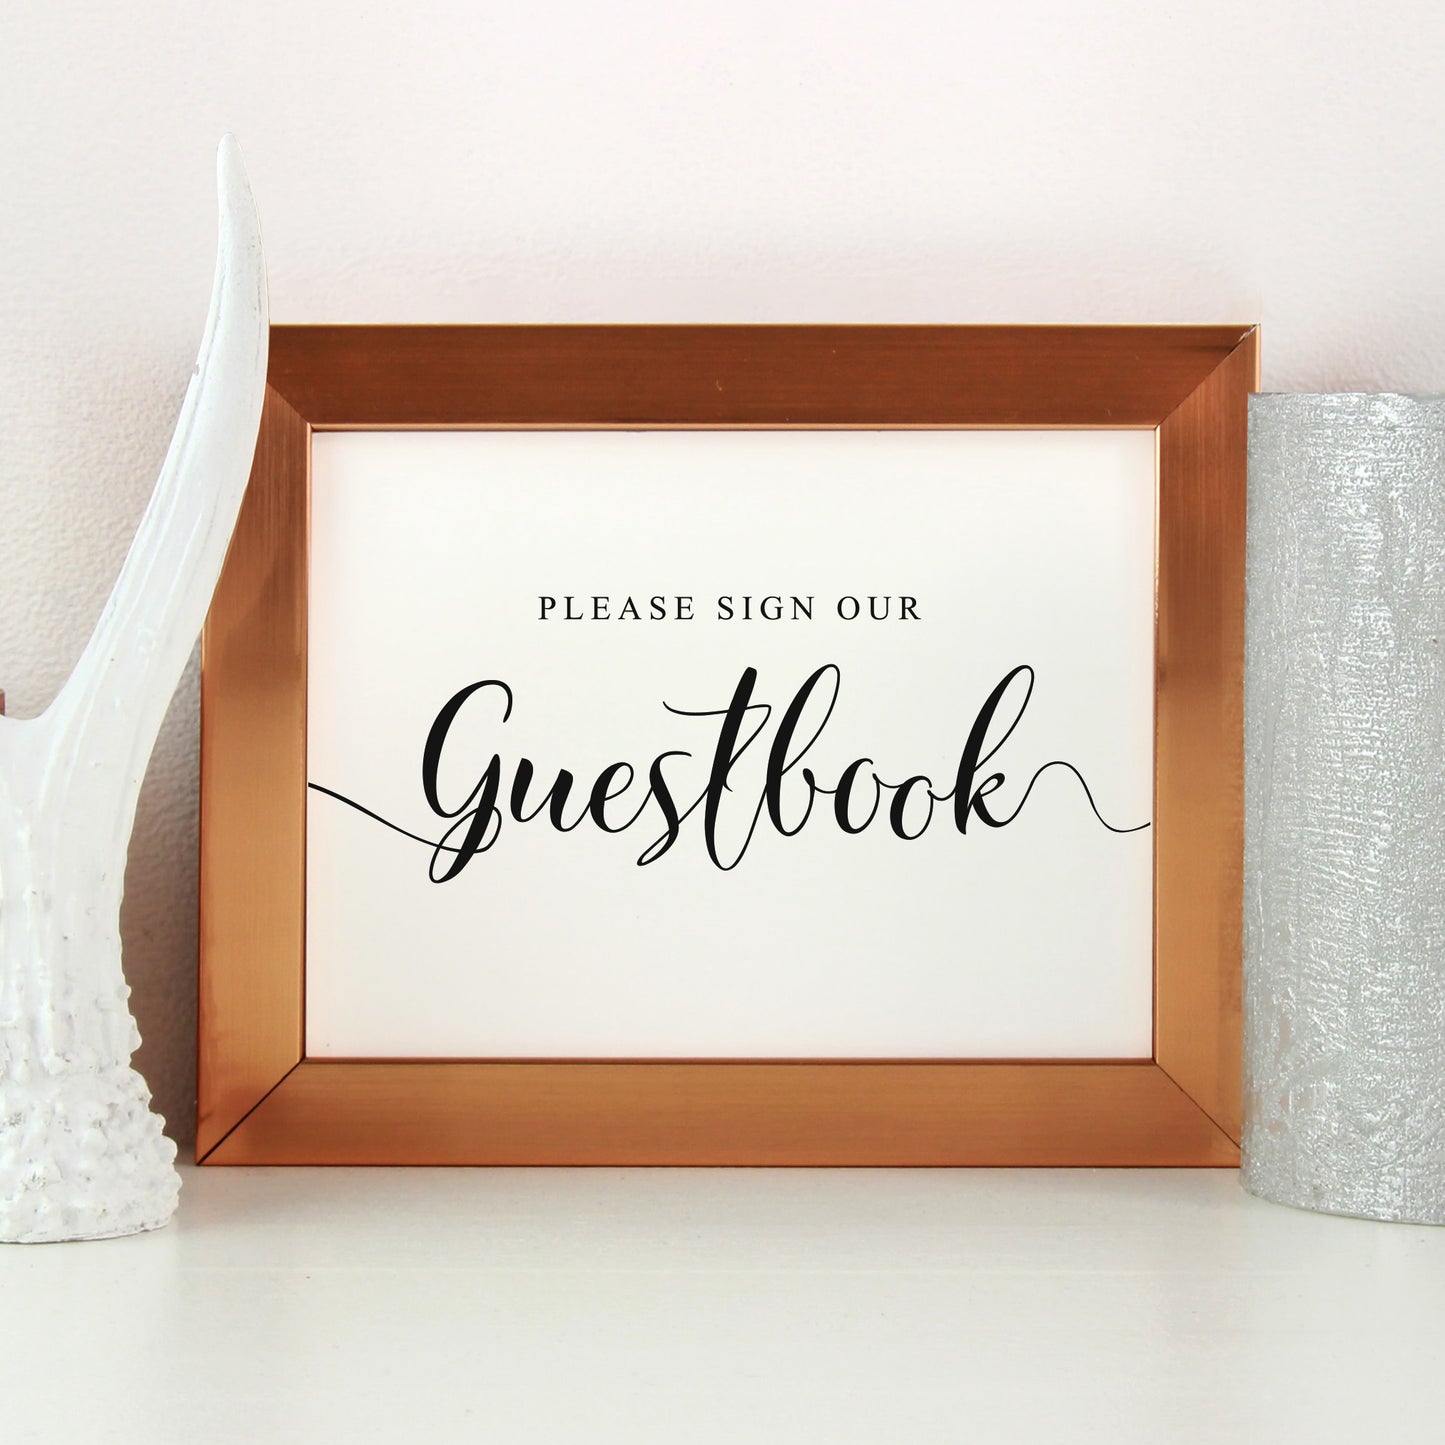 A5 wedding signage with text saying please sign our guestbook